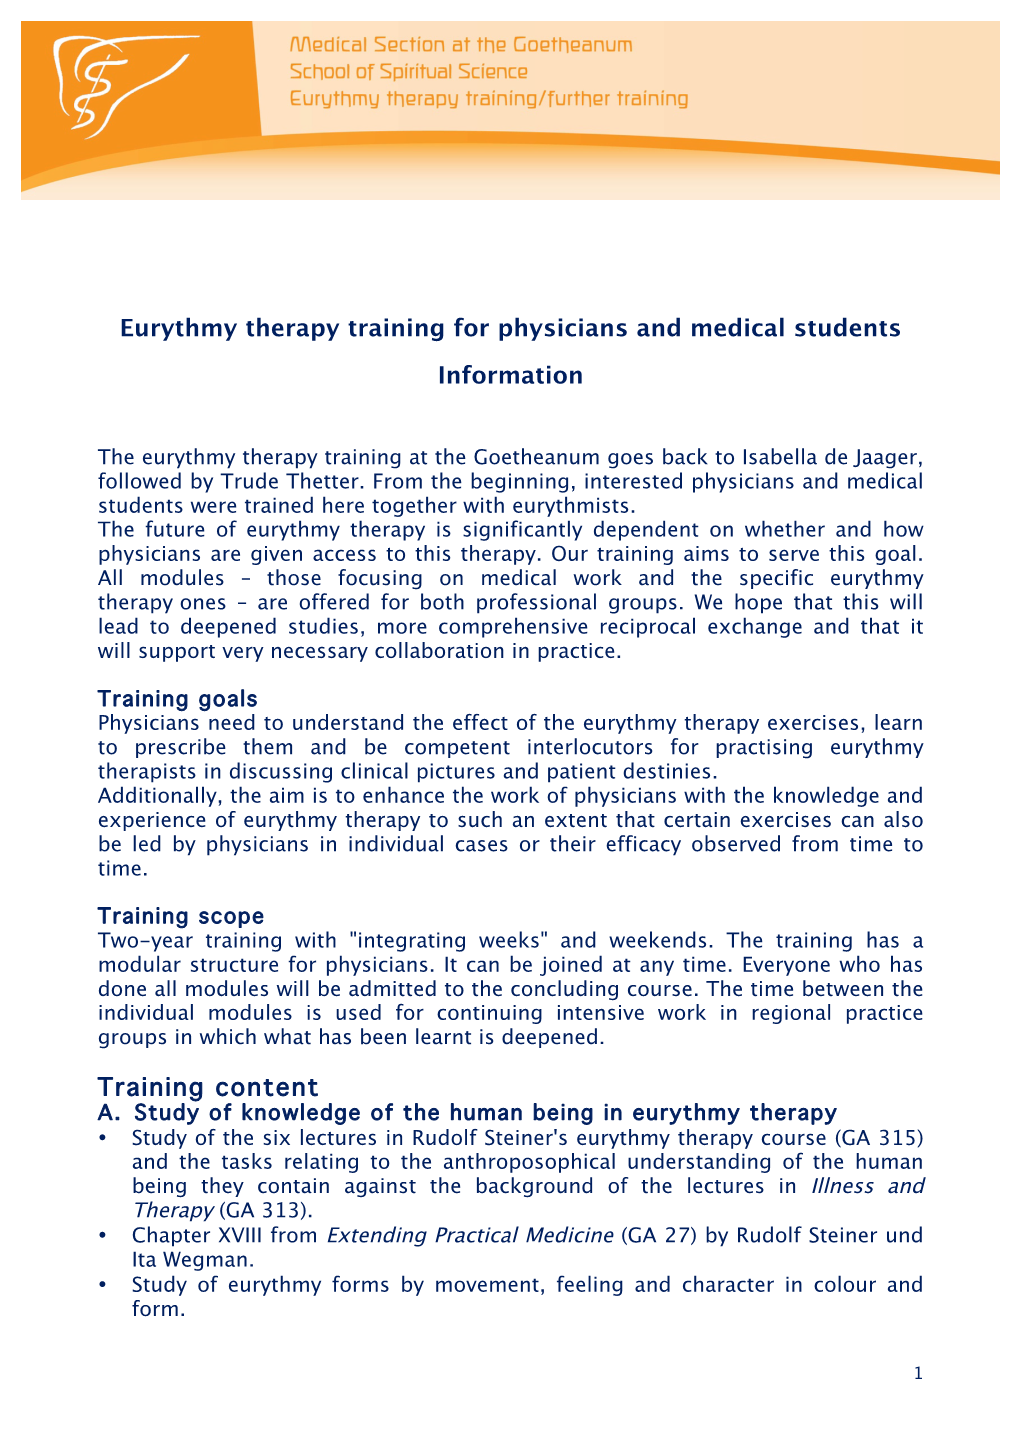 Eurythmy Therapy Training for Physicians and Medical Students Information Training Content